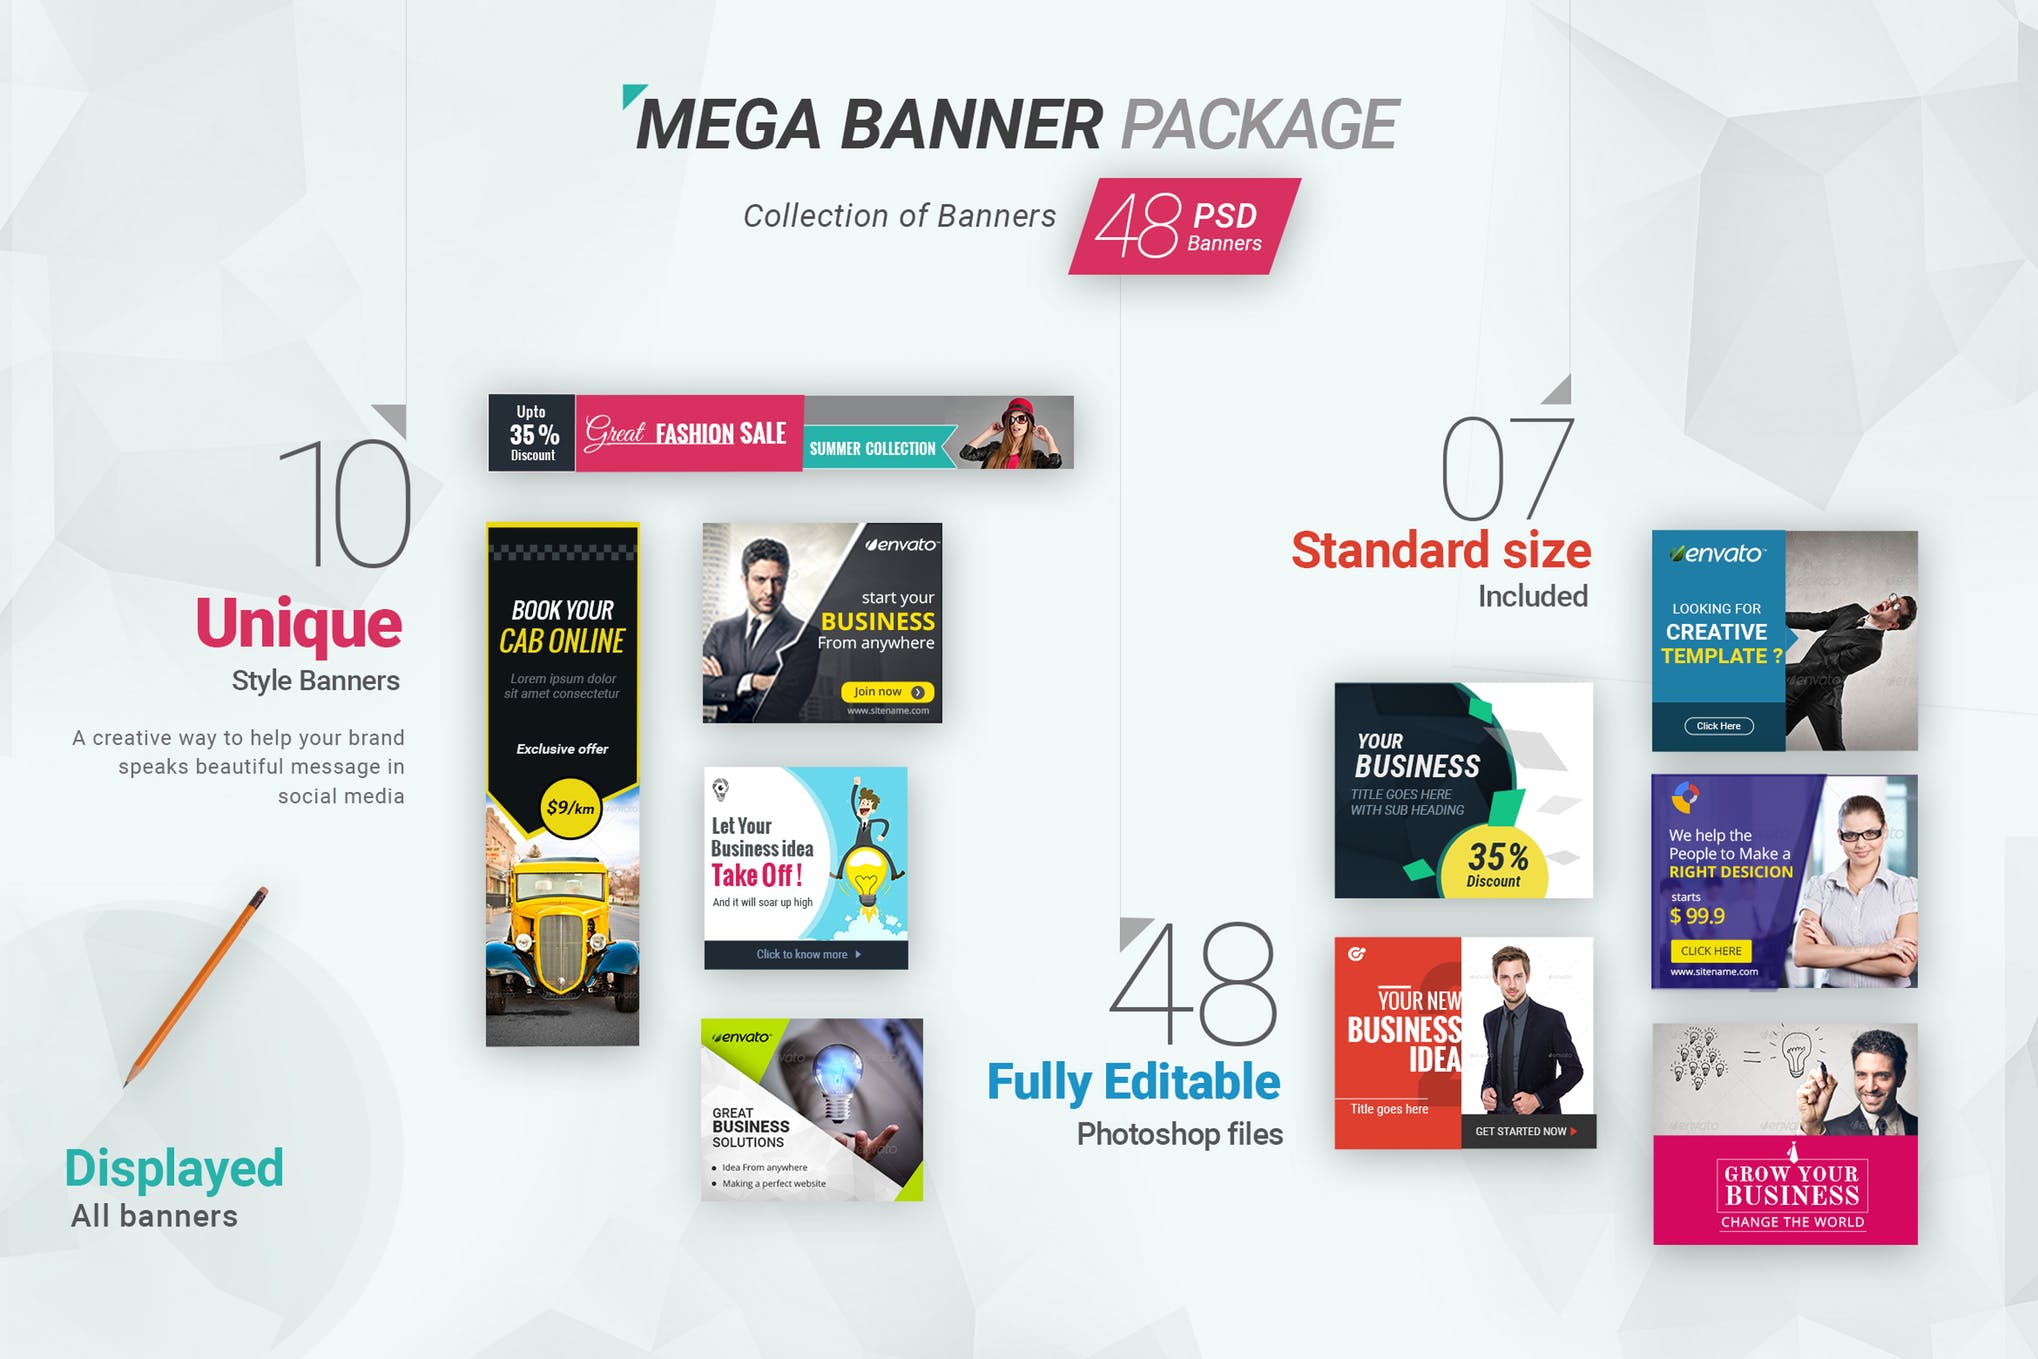 Mega Banner Package 48 PSD Banners with FULL rights